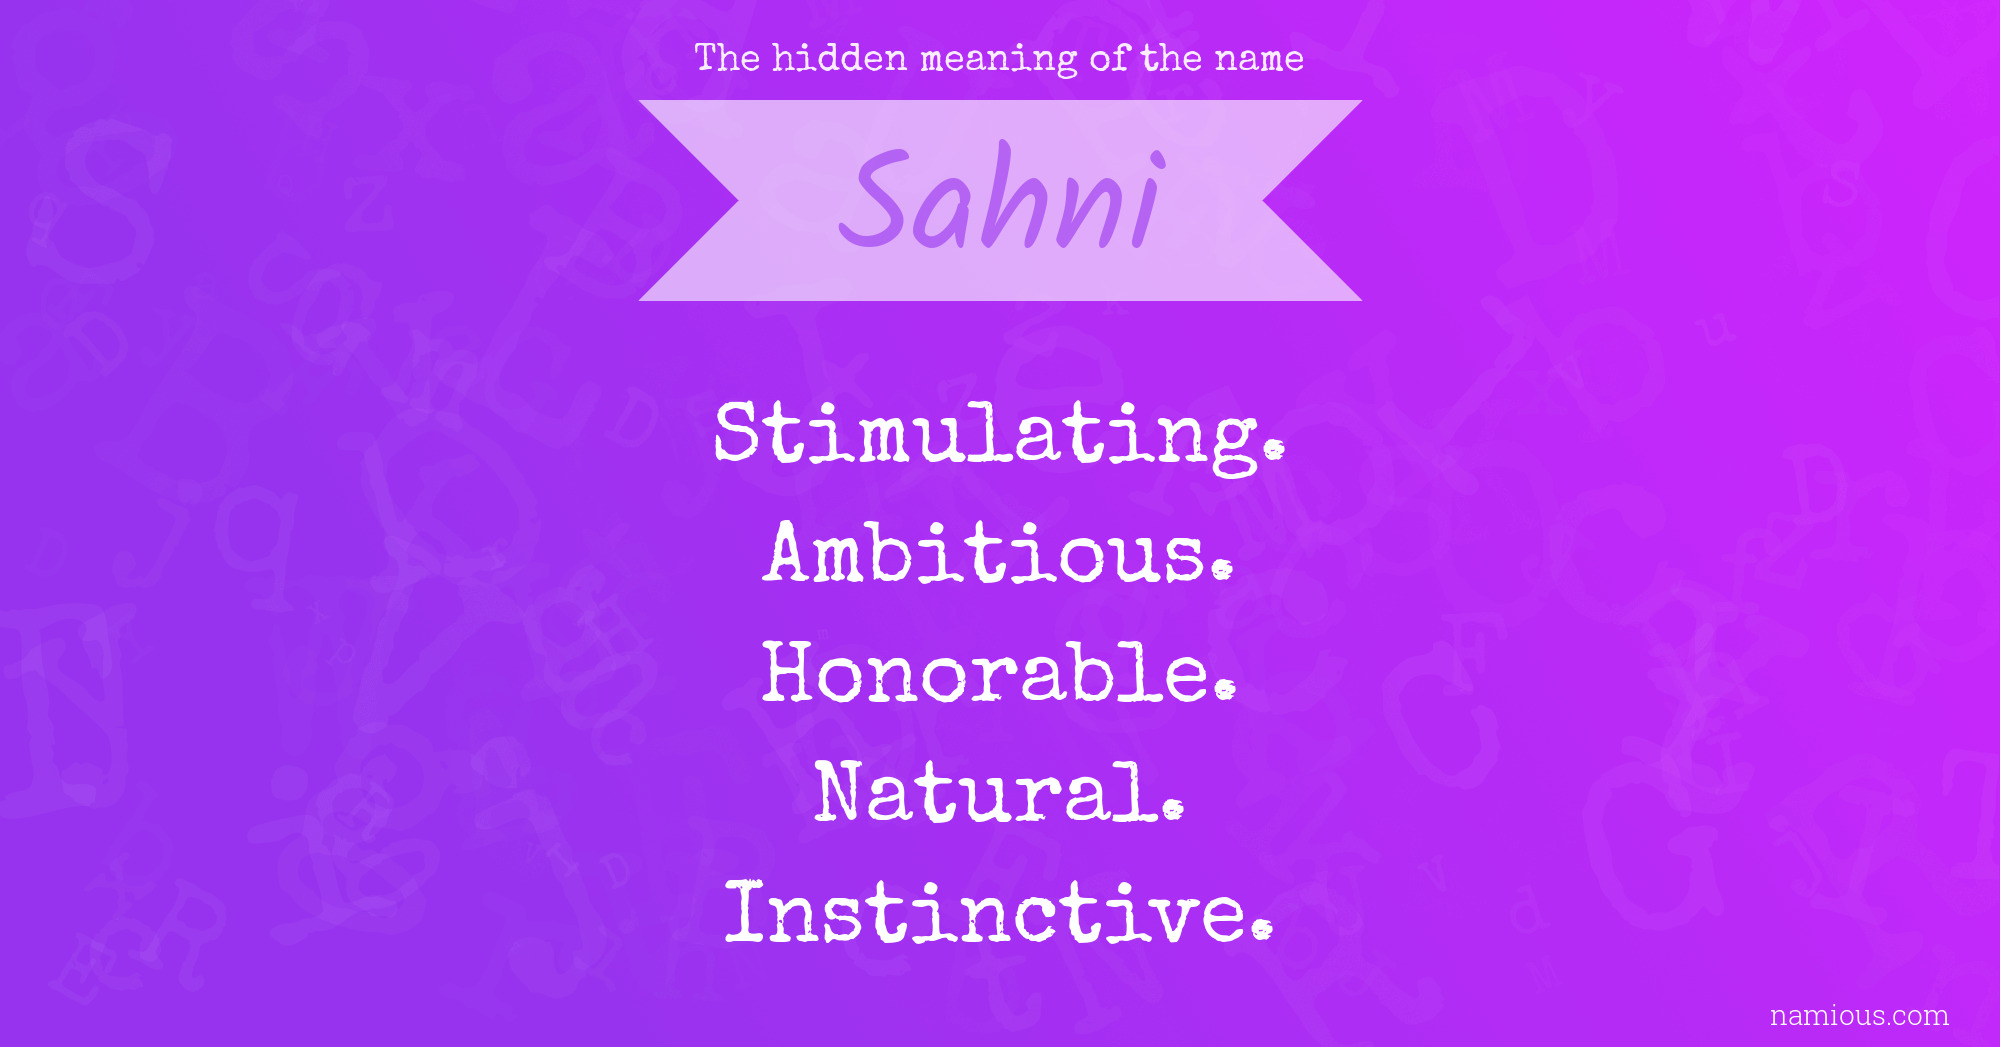 The hidden meaning of the name Sahni